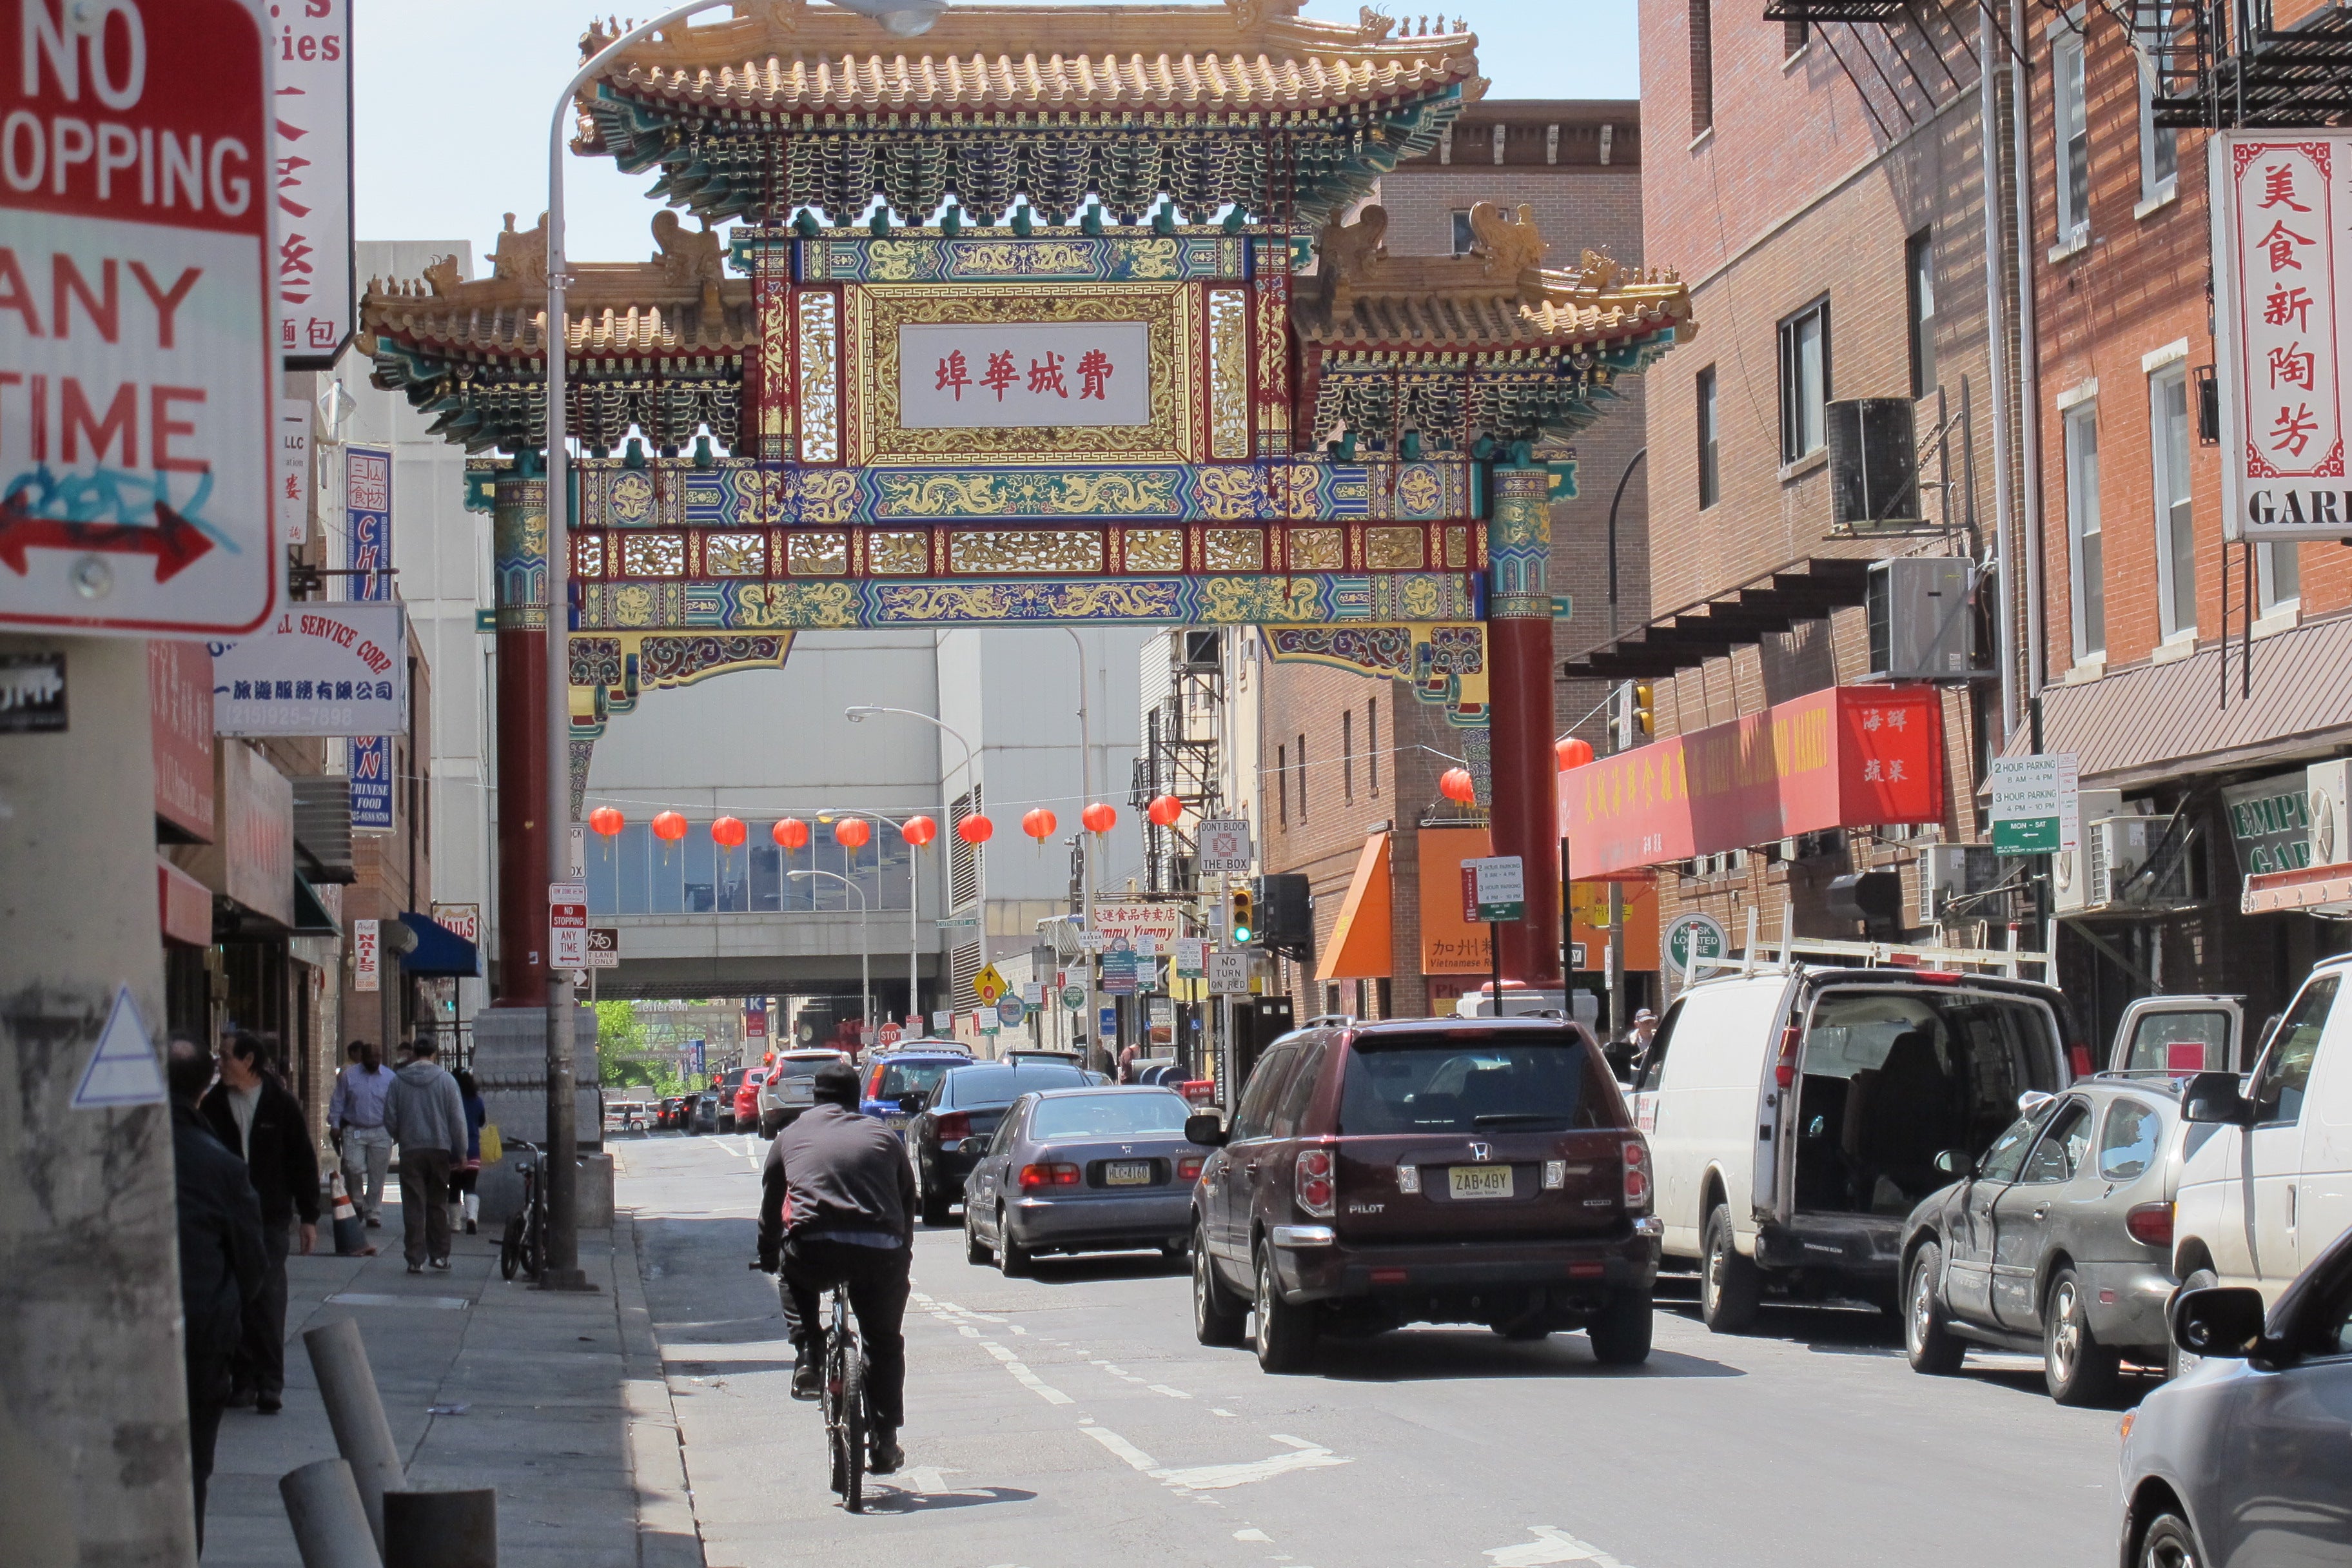 Later this summer a sharrow will likely replace the 10th Street bike lane in Chinatown.